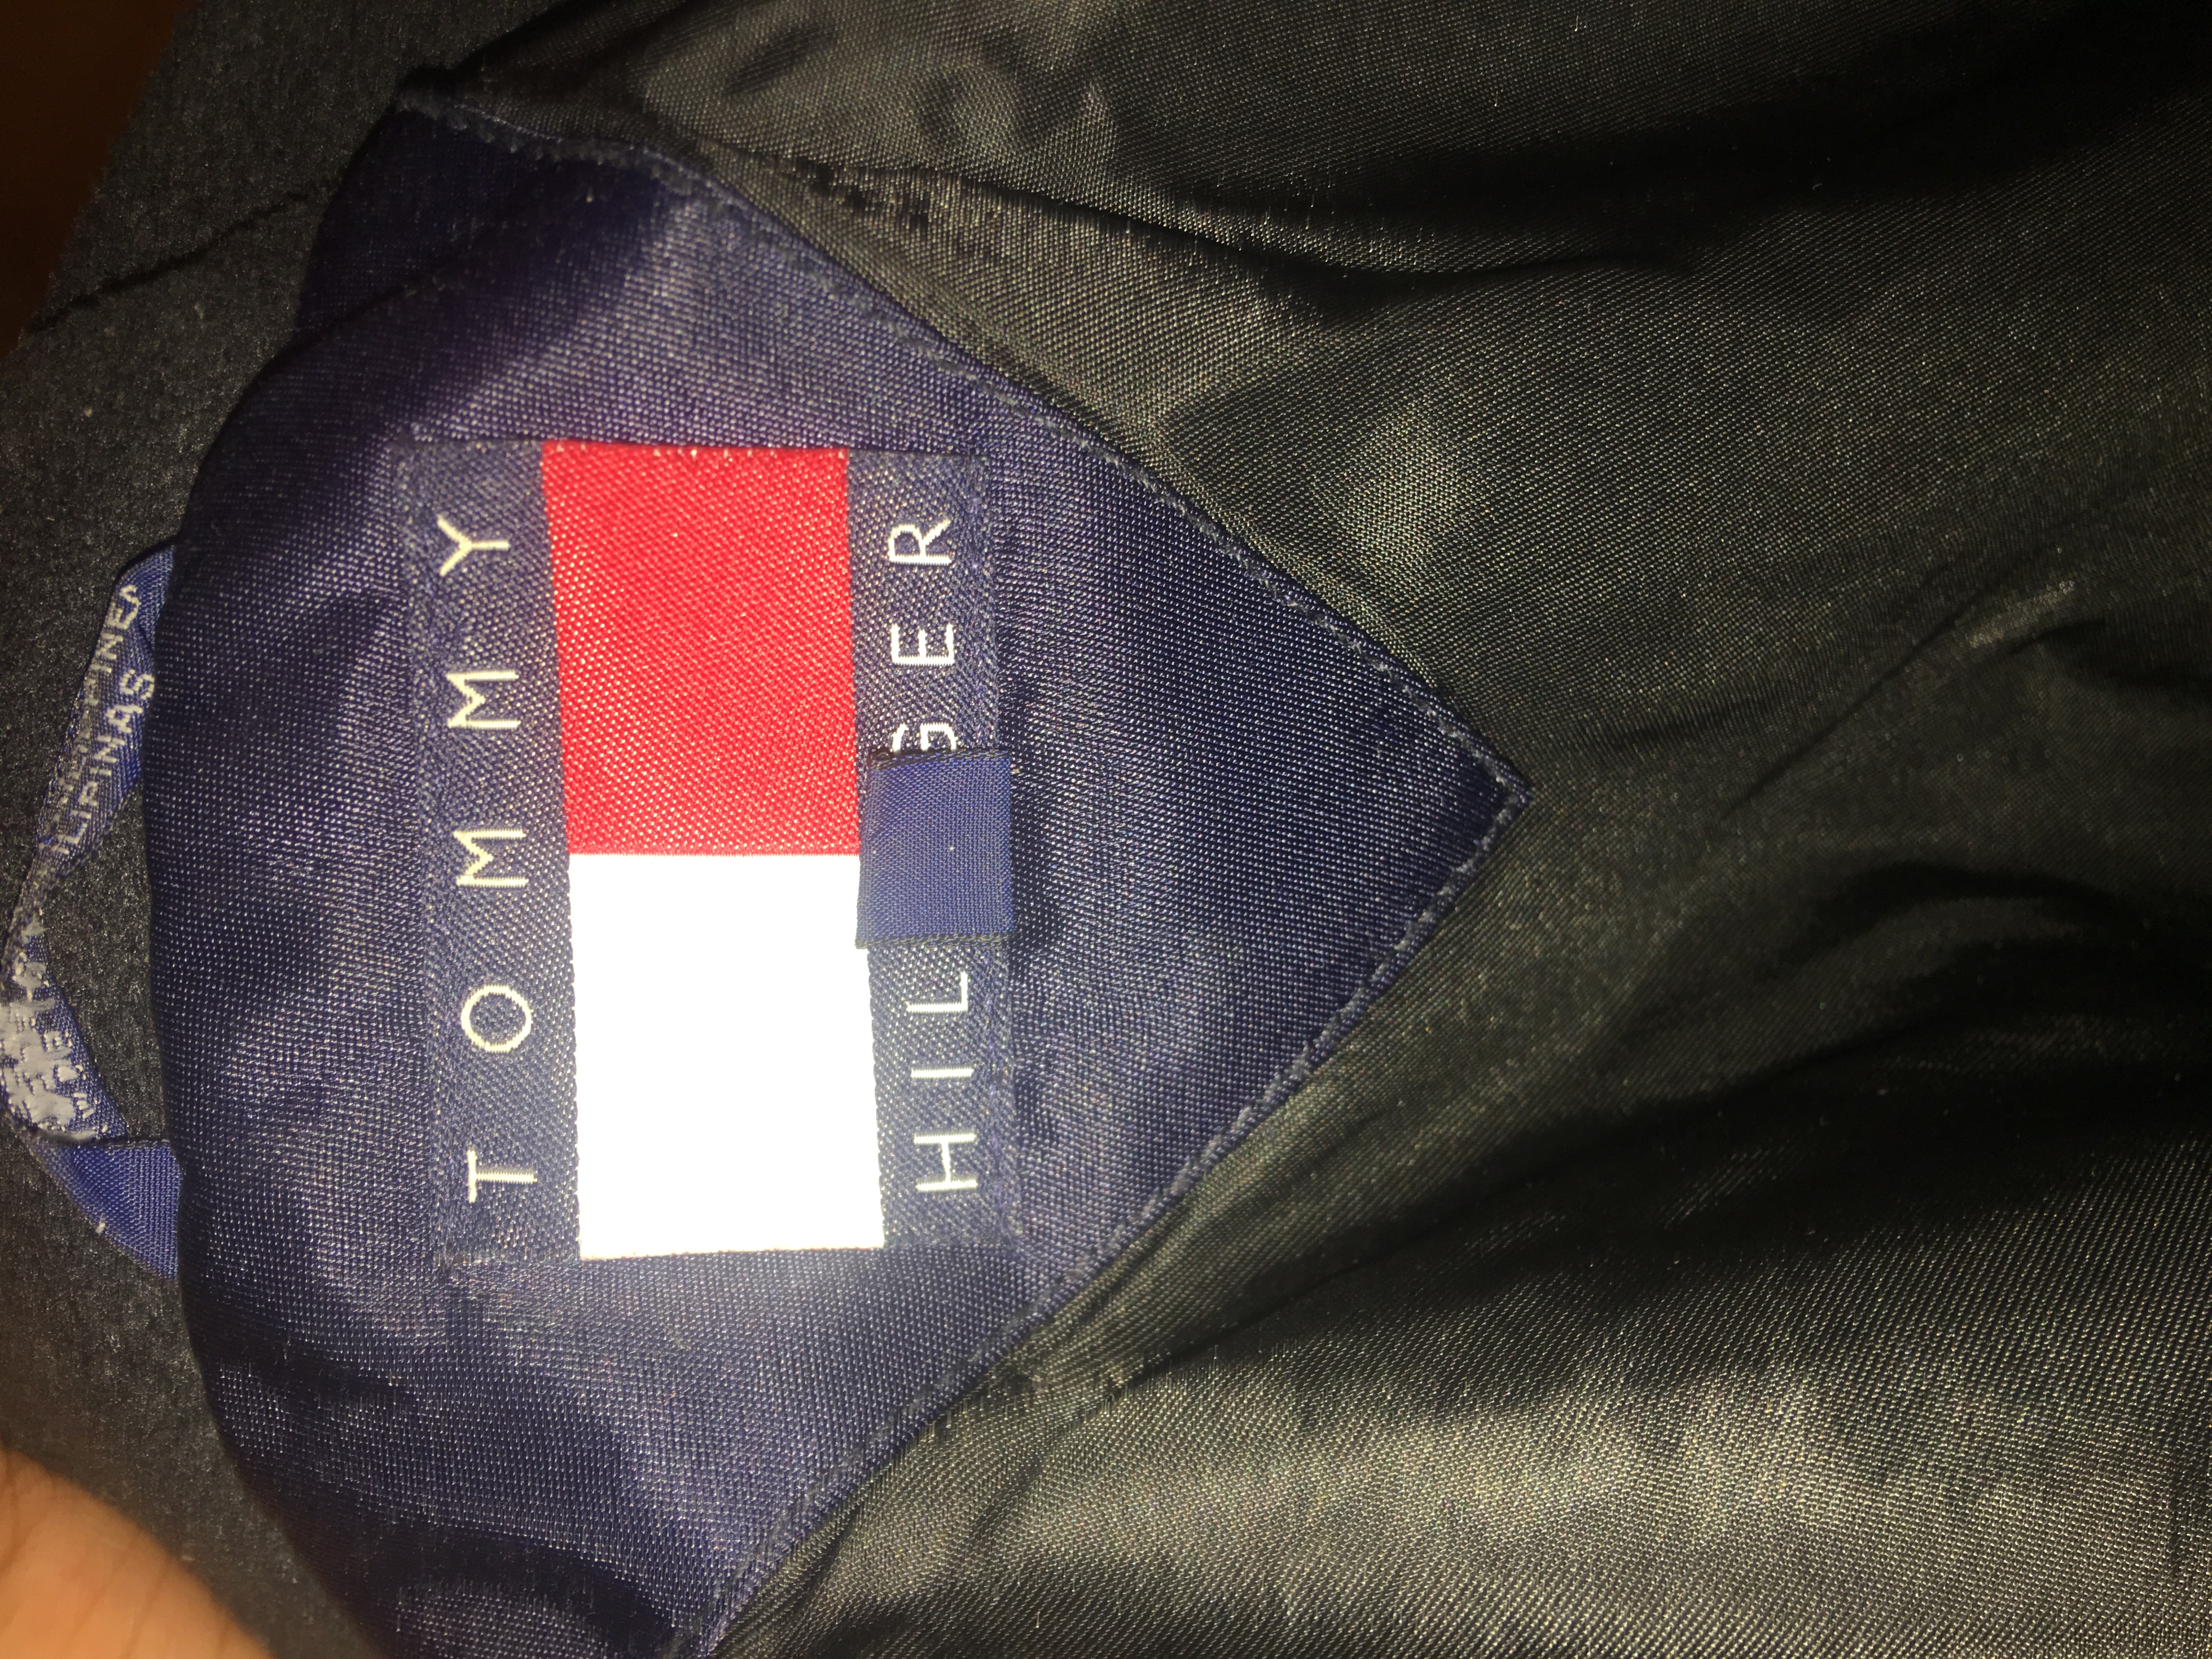 Did waste my money, real? Fake? Tommy jacket - T-Shirt Forum & Community